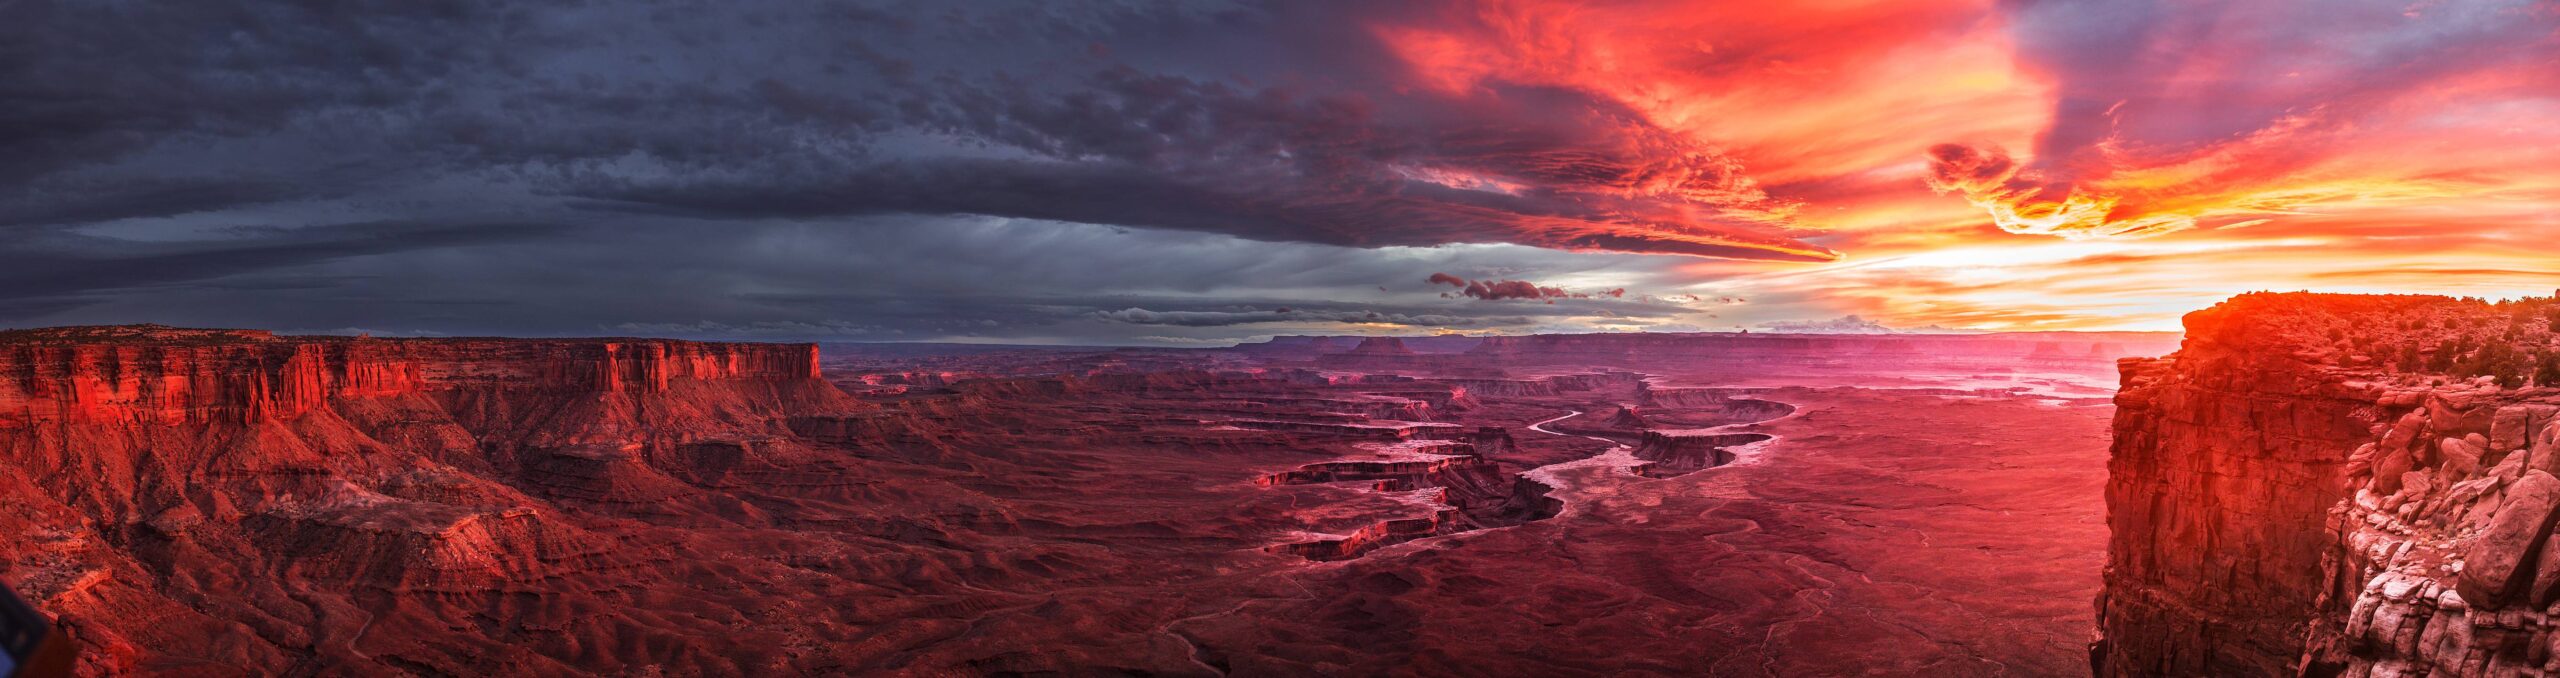 Two days ago in Canyonlands National Park, I saw the best sunset I